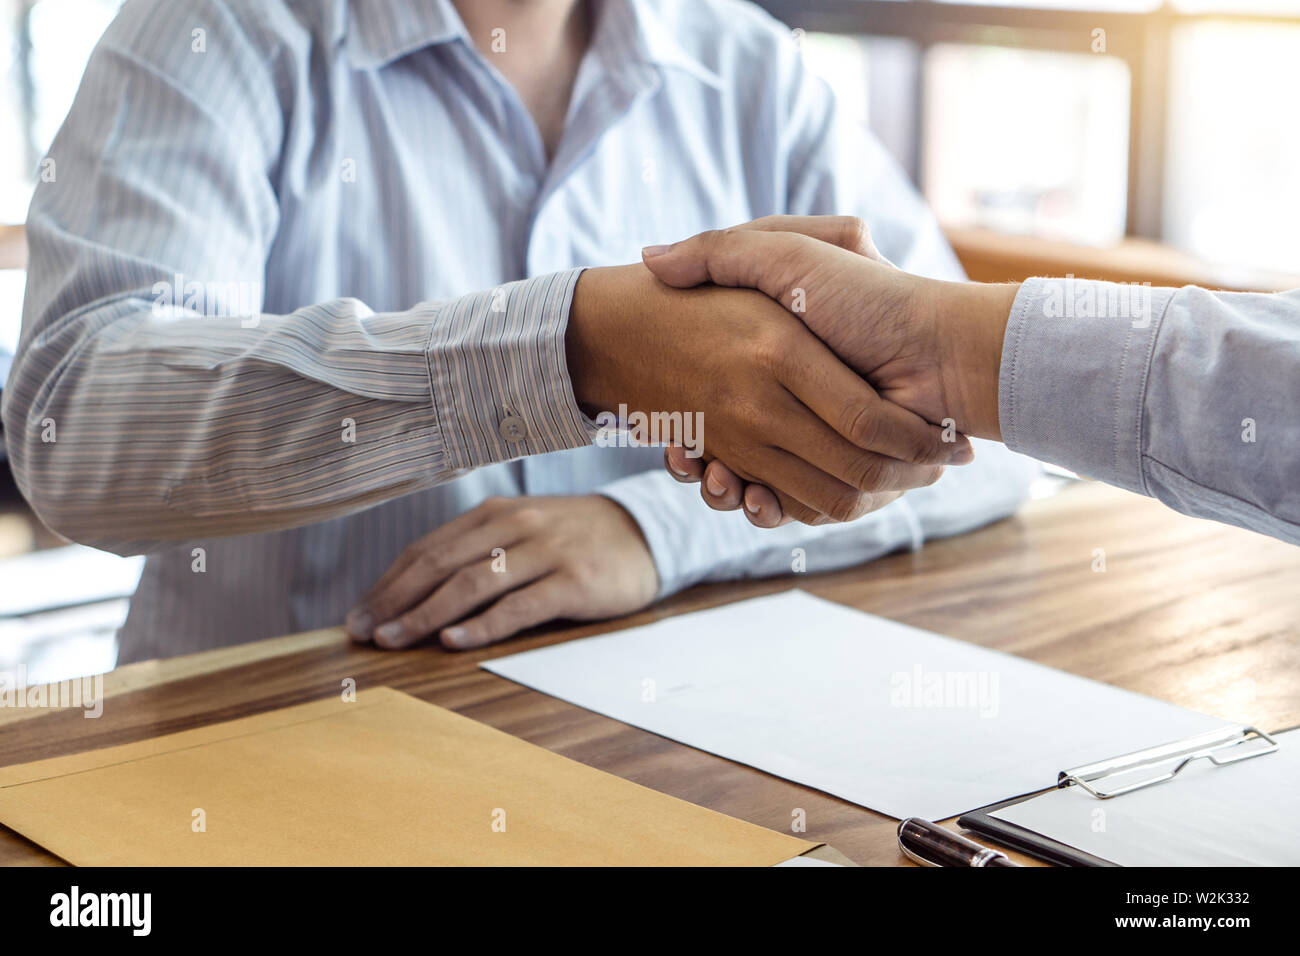 Finishing up a meeting, handshake of two happy business people after contract agreement to become a partner, collaborative teamwork. Stock Photo